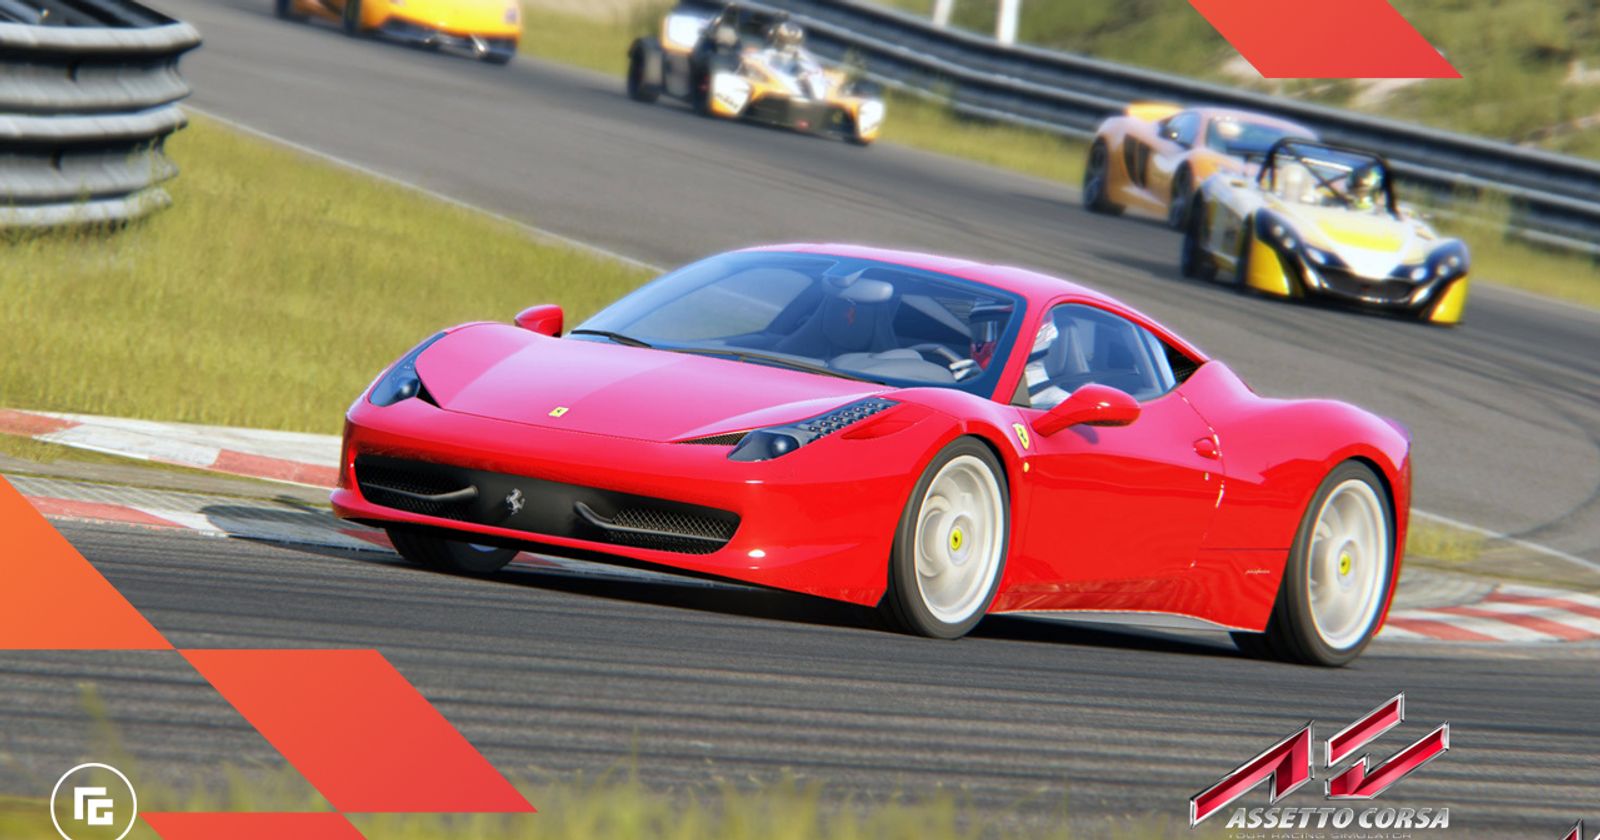 Unreal Engine Assetto Corsa 2: Everything We Know So Far